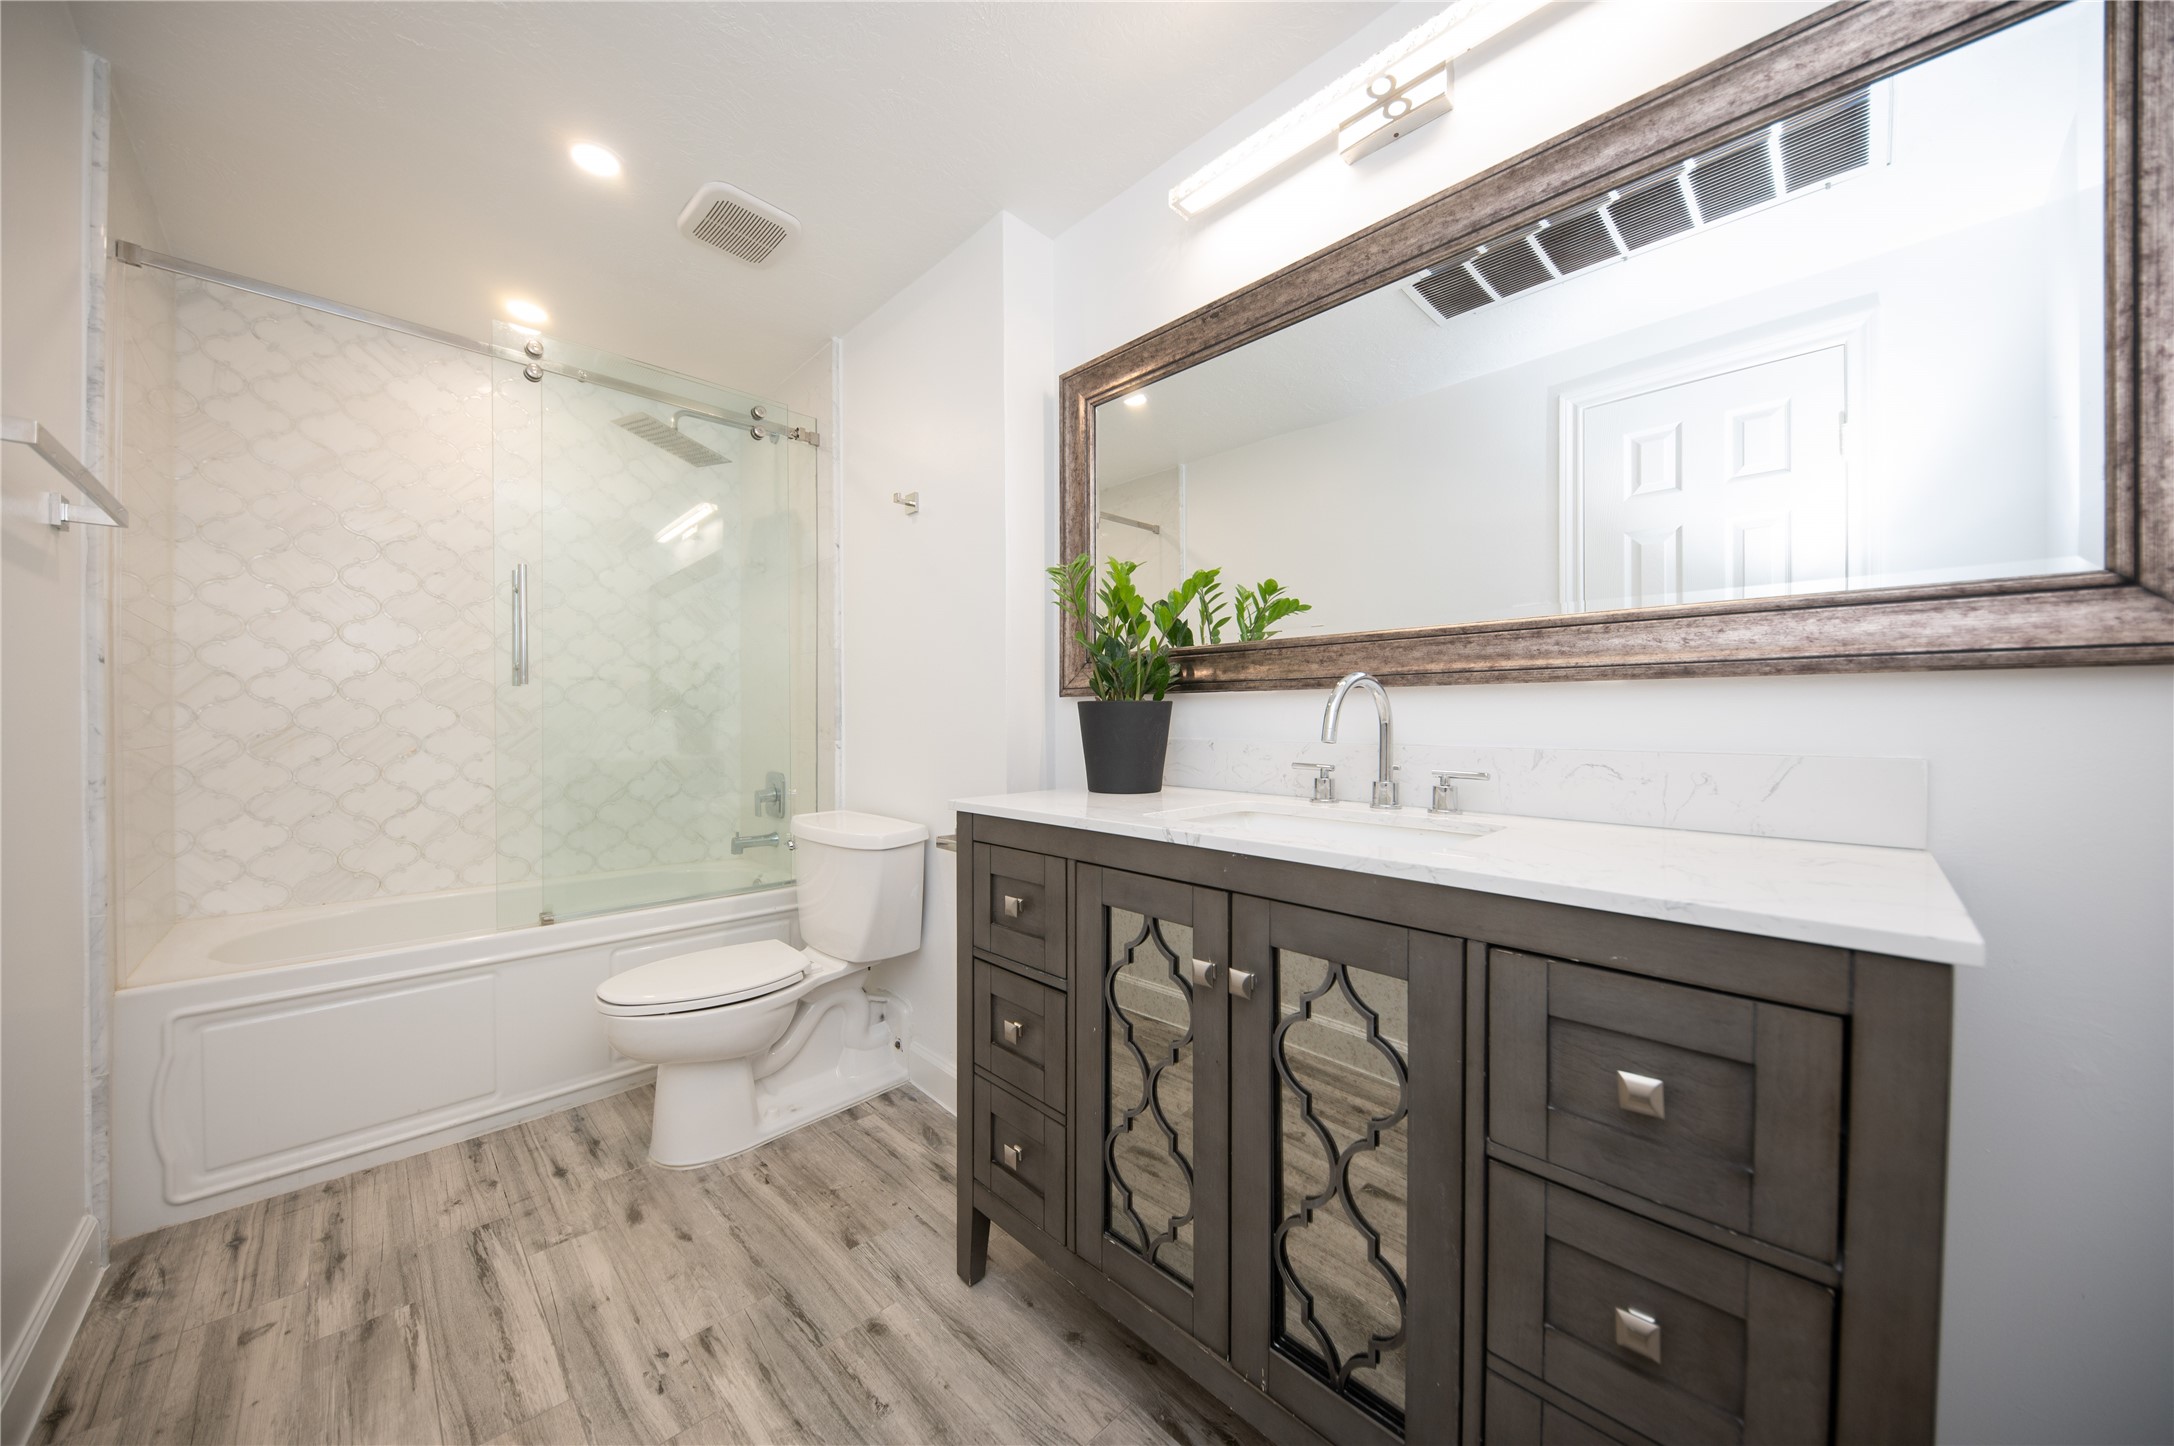 Here is a great angle on this updated bathroom with a custom furniture bathroom sink & soft close drawers, large framed mirror and custom bathtub/shower combination featuring frameless glass. Notice the wood 